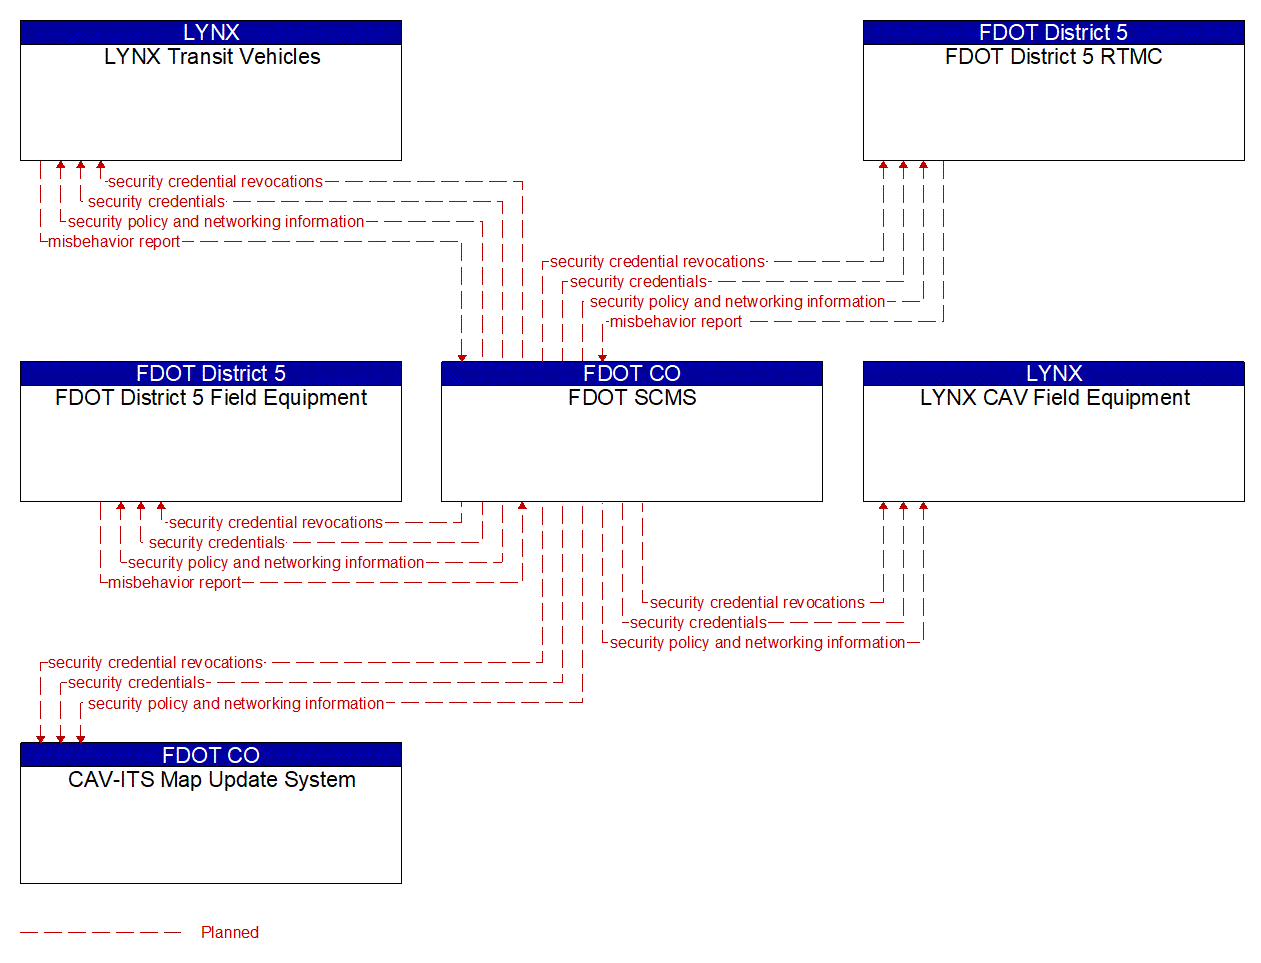 Service Graphic: Security and Credentials Management (LYNX TSP/CAV Project)